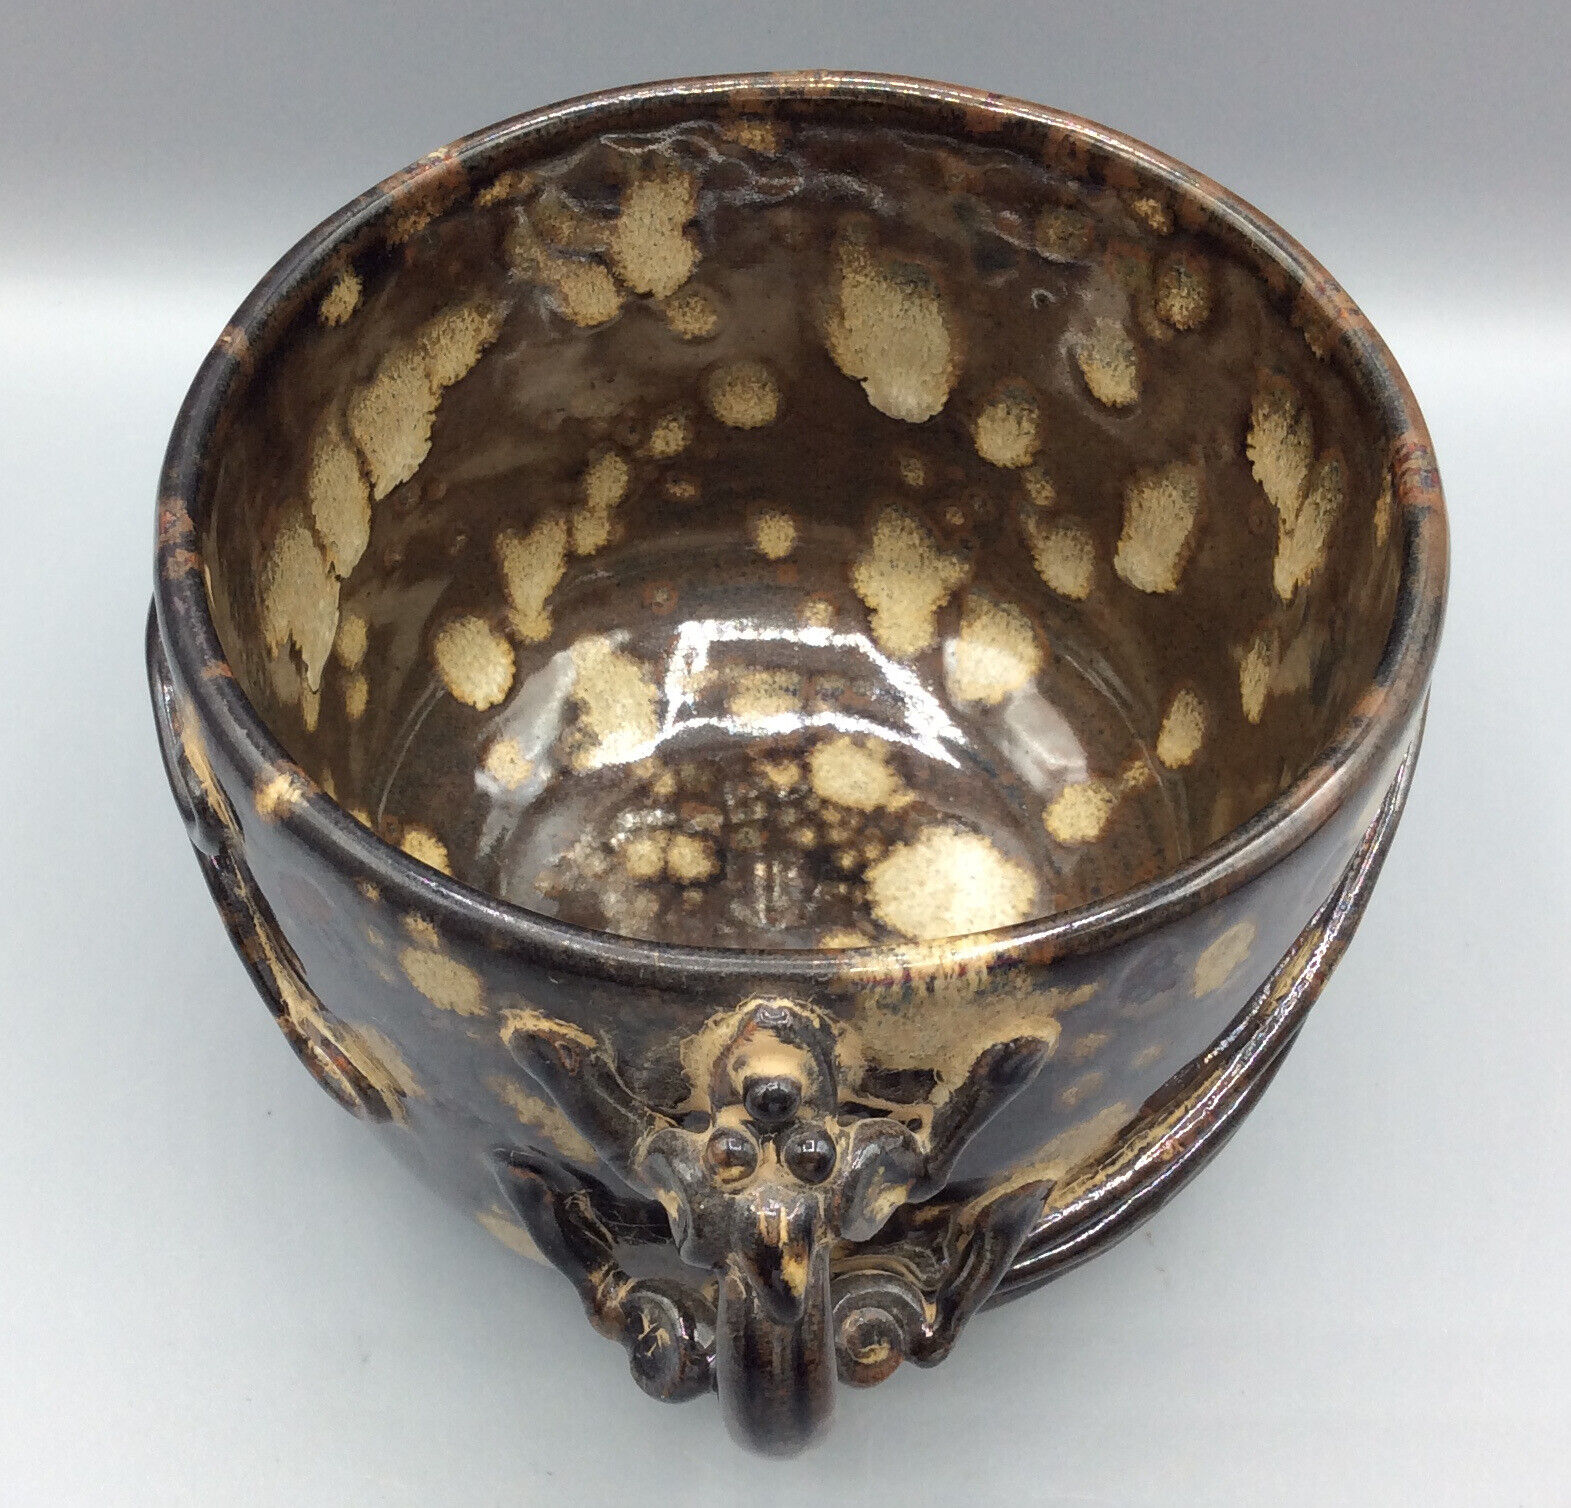 Antique Valuations: Antique Chinese Studio Pottery Bowl vase Dragons Tortoise Shell